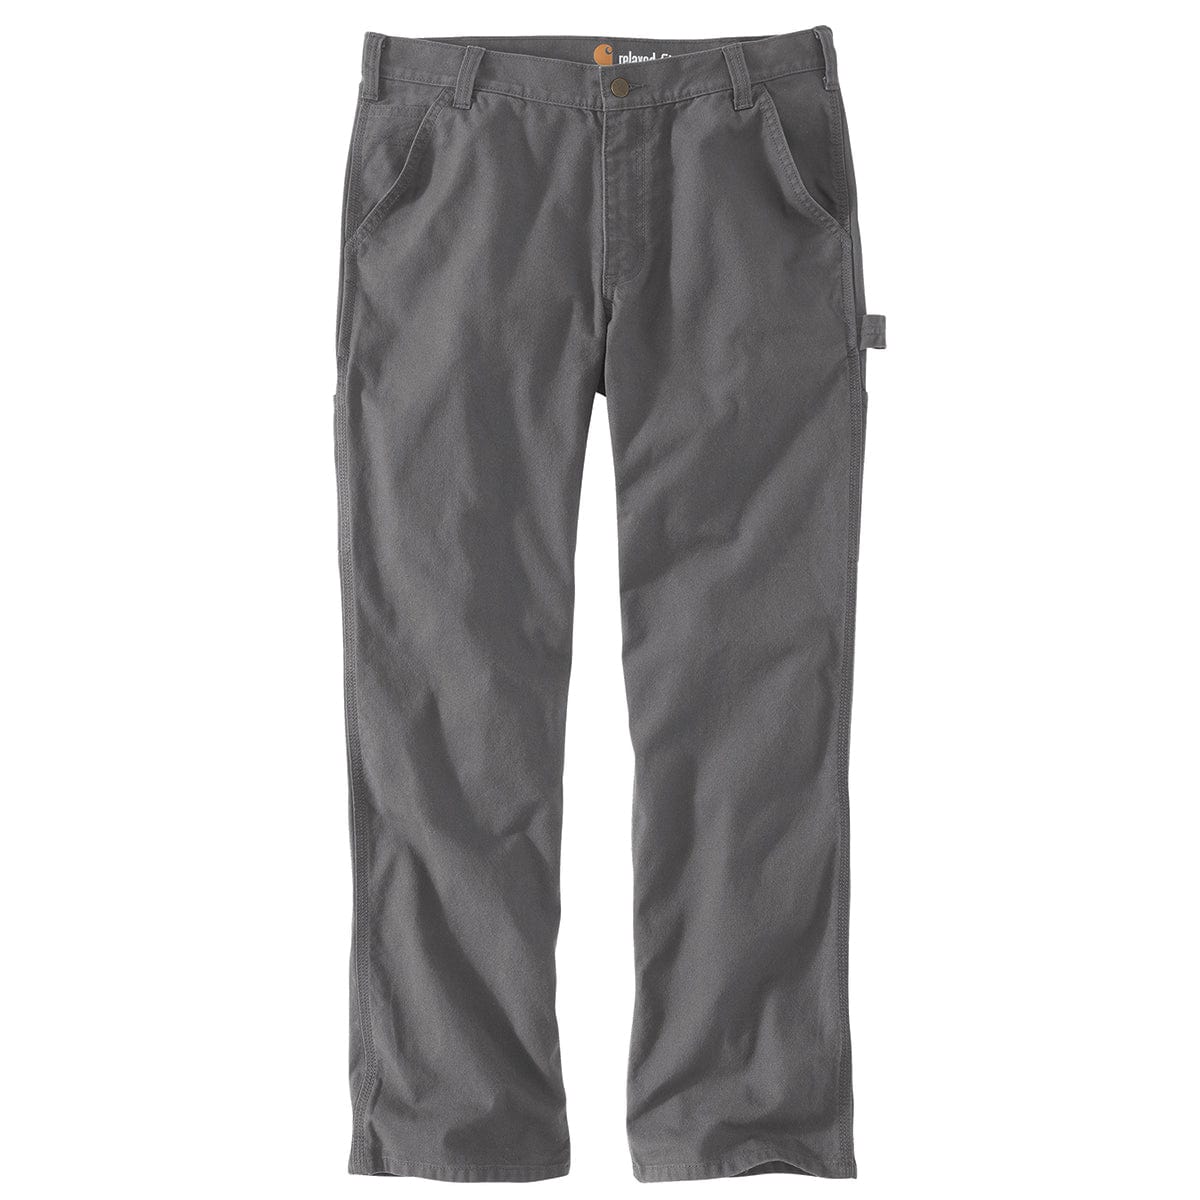 Carhartt Rugged Flex Relaxed Fit Duck Utility Work Pant, Gravel - 30